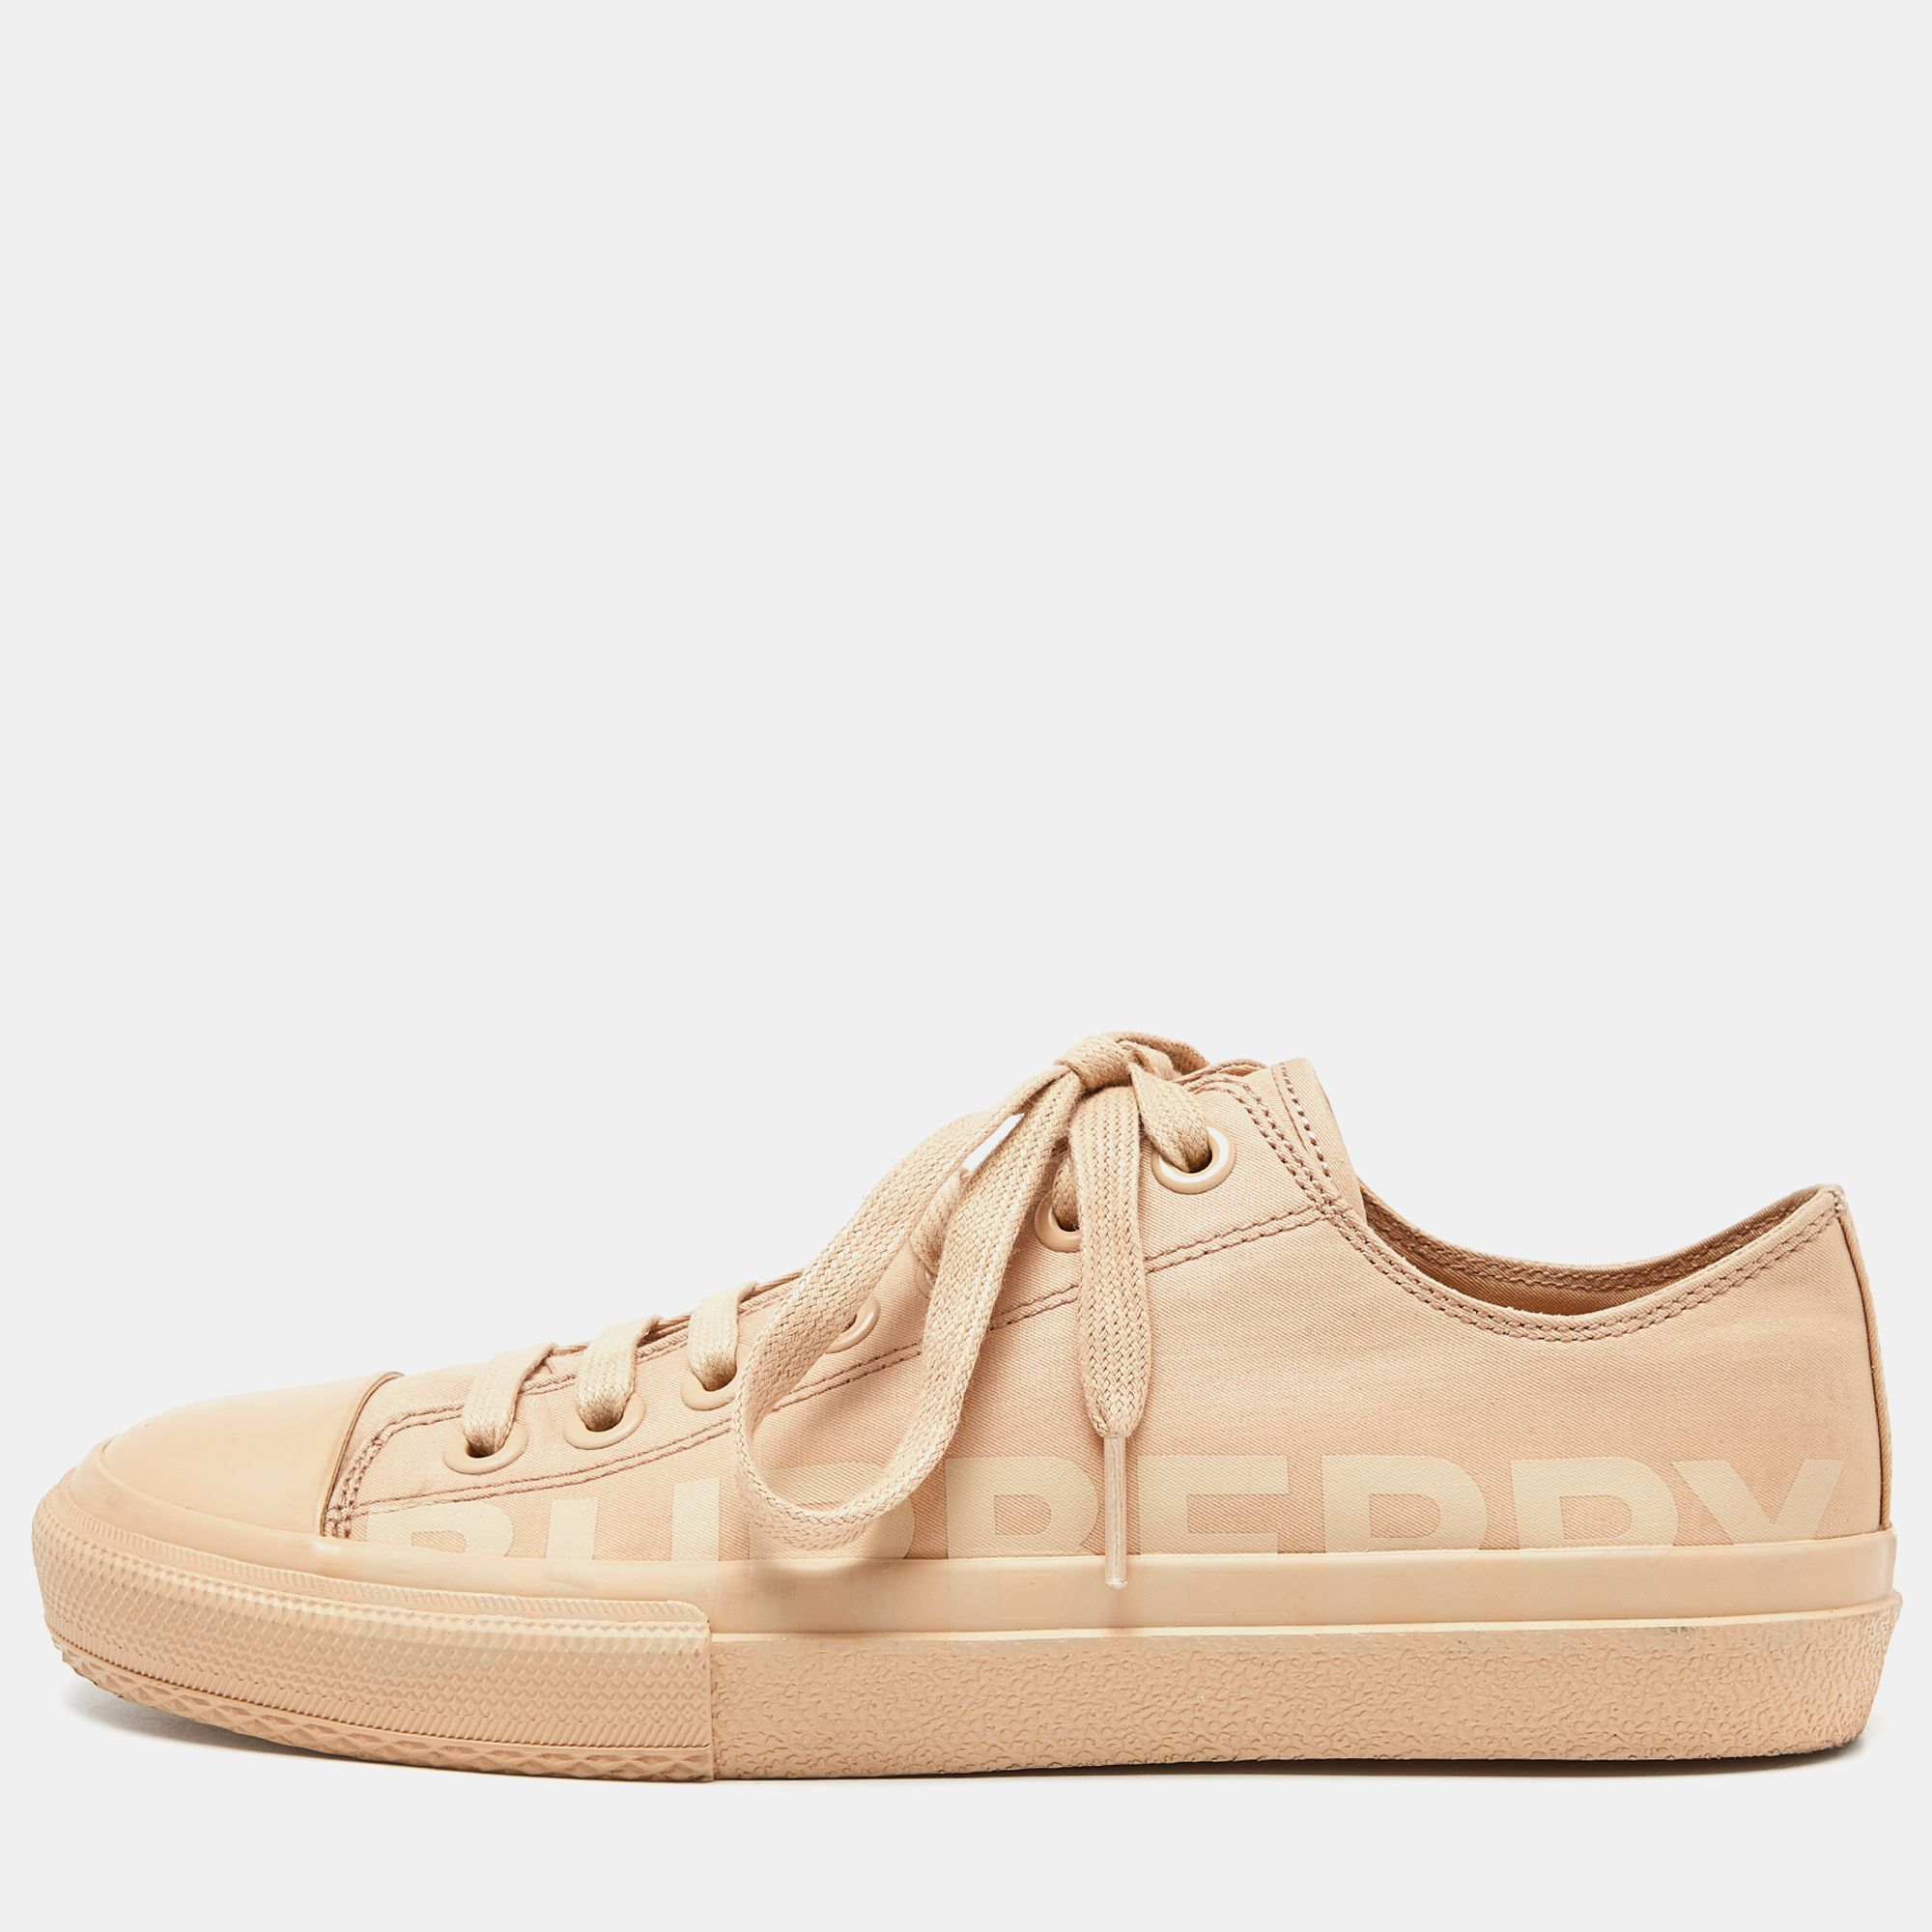 Pre-owned Burberry Beige Logo Print Canvas Trainers Size 39